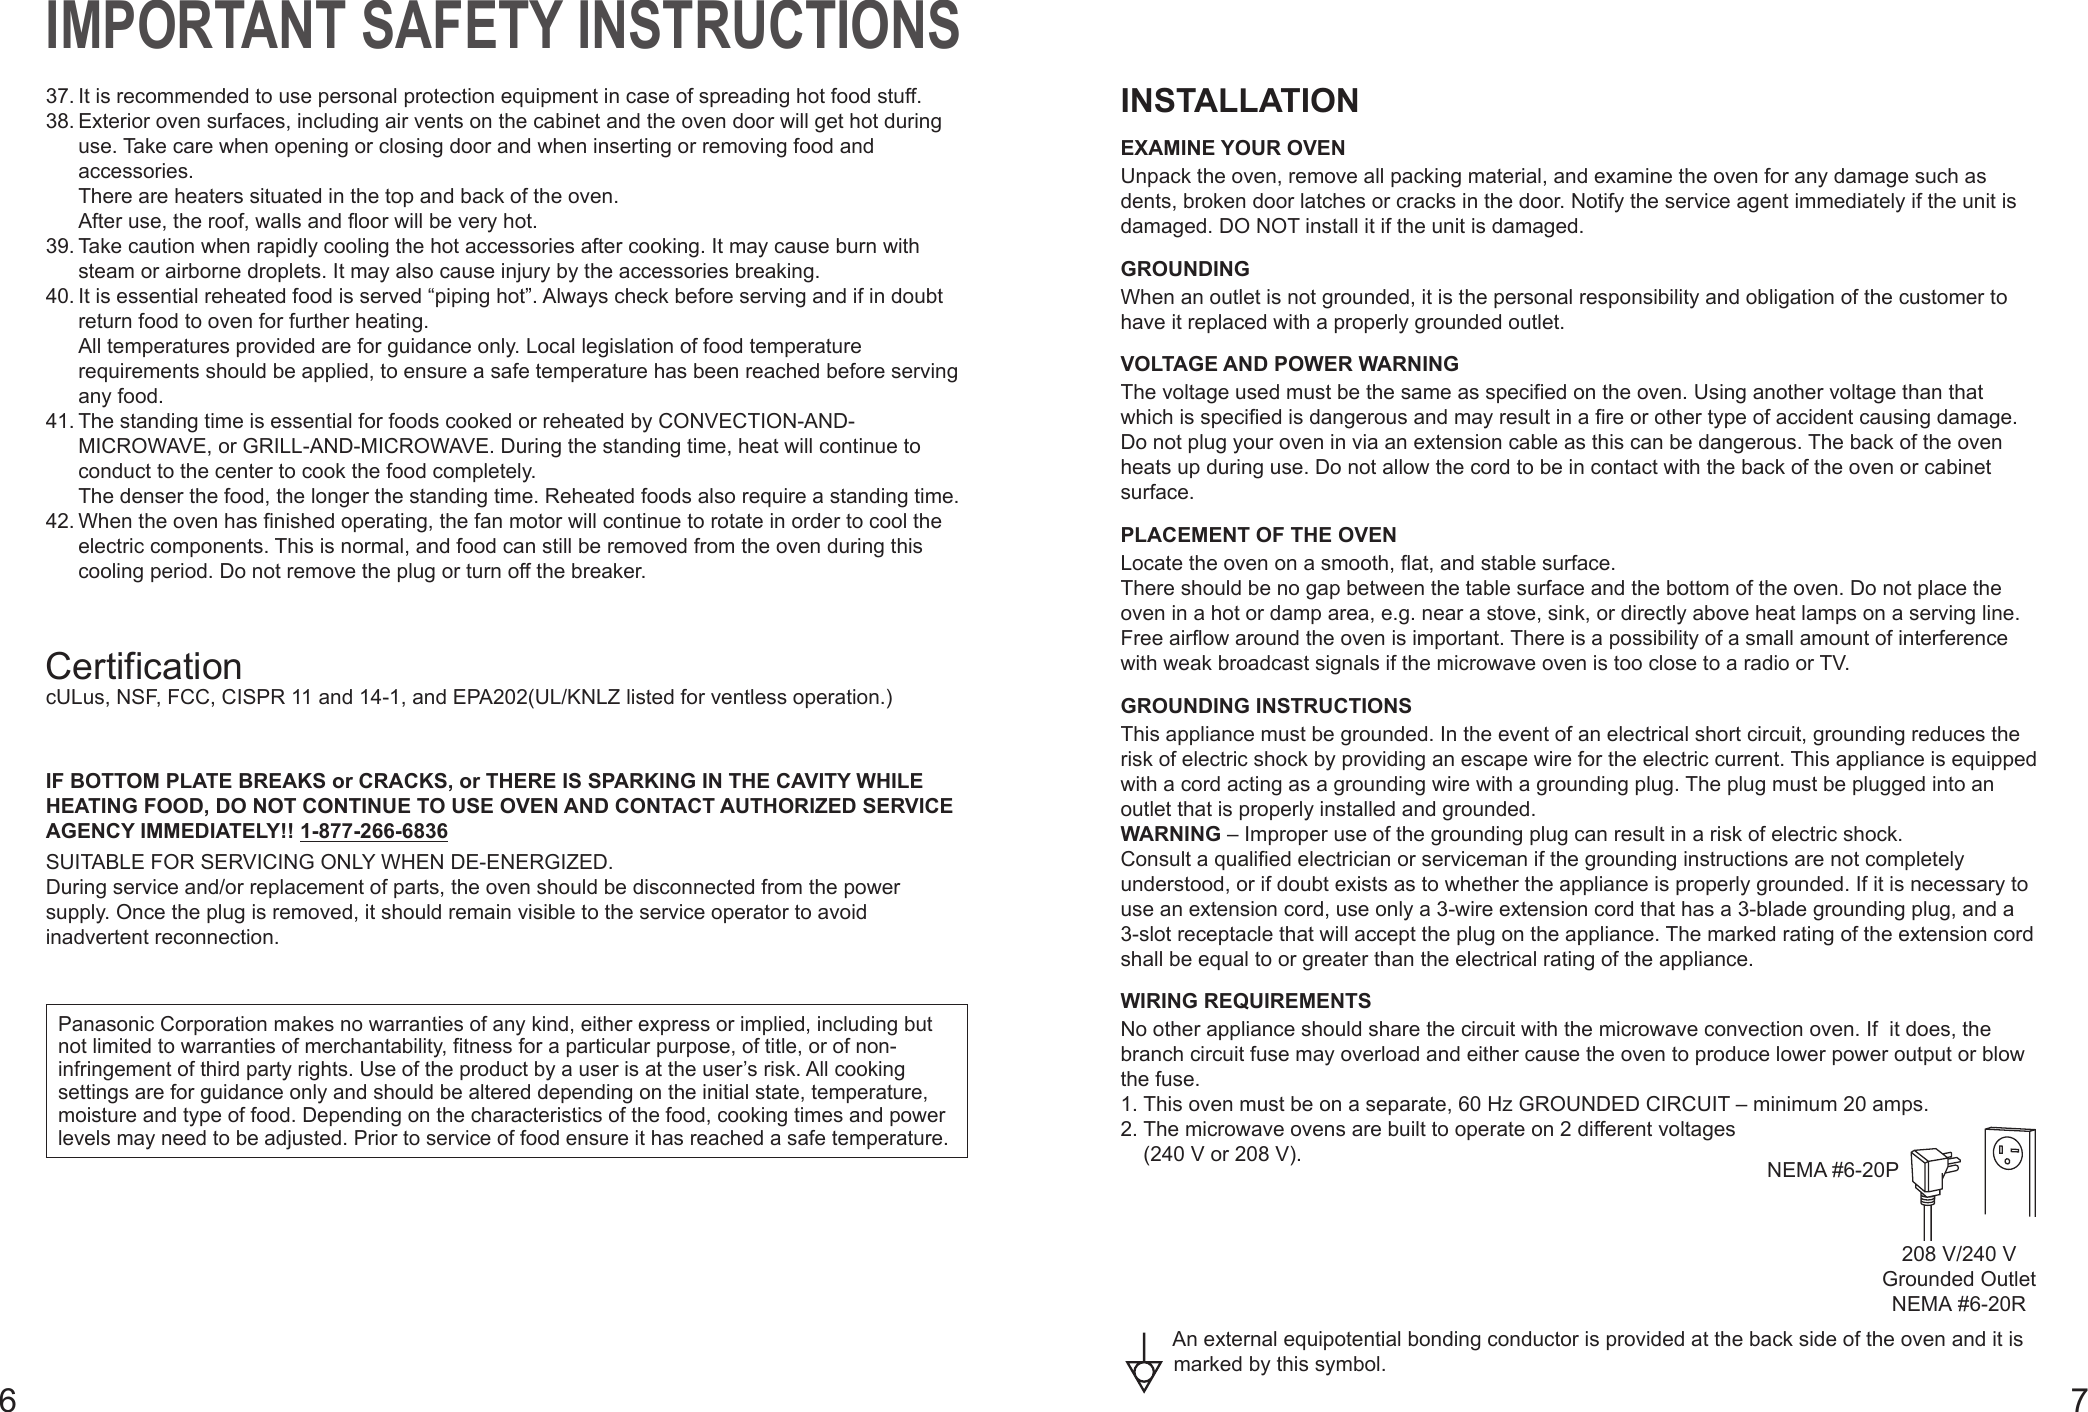 67IMPORTANT SAFETY INSTRUCTIONS37. It is recommended to use personal protection equipment in case of spreading hot food stuff.38. Exterior oven surfaces, including air vents on the cabinet and the oven door will get hot during use. Take care when opening or closing door and when inserting or removing food and accessories. There are heaters situated in the top and back of the oven. After use, the roof, walls and floor will be very hot.39. Take caution when rapidly cooling the hot accessories after cooking. It may cause burn with steam or airborne droplets. It may also cause injury by the accessories breaking.40. It is essential reheated food is served “piping hot”. Always check before serving and if in doubt return food to oven for further heating. All temperatures provided are for guidance only. Local legislation of food temperature requirements should be applied, to ensure a safe temperature has been reached before serving any food.41. The standing time is essential for foods cooked or reheated by CONVECTION-AND-MICROWAVE, or GRILL-AND-MICROWAVE. During the standing time, heat will continue to conduct to the center to cook the food completely. The denser the food, the longer the standing time. Reheated foods also require a standing time.42. When the oven has finished operating, the fan motor will continue to rotate in order to cool the electric components. This is normal, and food can still be removed from the oven during this cooling period. Do not remove the plug or turn off the breaker.CertificationcULus, NSF, FCC, CISPR 11 and 14-1, and EPA202(UL/KNLZ listed for ventless operation.)IF BOTTOM PLATE BREAKS or CRACKS, or THERE IS SPARKING IN THE CAVITY WHILE HEATING FOOD, DO NOT CONTINUE TO USE OVEN AND CONTACT AUTHORIZED SERVICE AGENCY IMMEDIATELY!! 1-877-266-6836SUITABLE FOR SERVICING ONLY WHEN DE-ENERGIZED.During service and/or replacement of parts, the oven should be disconnected from the power supply. Once the plug is removed, it should remain visible to the service operator to avoid inadvertent reconnection.Panasonic Corporation makes no warranties of any kind, either express or implied, including but not limited to warranties of merchantability, fitness for a particular purpose, of title, or of non-infringement of third party rights. Use of the product by a user is at the user’s risk. All cooking settings are for guidance only and should be altered depending on the initial state, temperature, moisture and type of food. Depending on the characteristics of the food, cooking times and power levels may need to be adjusted. Prior to service of food ensure it has reached a safe temperature. INSTALLATIONEXAMINE YOUR OVENUnpack the oven, remove all packing material, and examine the oven for any damage such as dents, broken door latches or cracks in the door. Notify the service agent immediately if the unit is damaged. DO NOT install it if the unit is damaged.GROUNDINGWhen an outlet is not grounded, it is the personal responsibility and obligation of the customer to have it replaced with a properly grounded outlet.VOLTAGE AND POWER WARNINGThe voltage used must be the same as specified on the oven. Using another voltage than that which is specified is dangerous and may result in a fire or other type of accident causing damage. Do not plug your oven in via an extension cable as this can be dangerous. The back of the oven heats up during use. Do not allow the cord to be in contact with the back of the oven or cabinet surface.PLACEMENT OF THE OVENLocate the oven on a smooth, flat, and stable surface.There should be no gap between the table surface and the bottom of the oven. Do not place the oven in a hot or damp area, e.g. near a stove, sink, or directly above heat lamps on a serving line. Free airflow around the oven is important. There is a possibility of a small amount of interference with weak broadcast signals if the microwave oven is too close to a radio or TV.GROUNDING INSTRUCTIONSThis appliance must be grounded. In the event of an electrical short circuit, grounding reduces the risk of electric shock by providing an escape wire for the electric current. This appliance is equipped with a cord acting as a grounding wire with a grounding plug. The plug must be plugged into an outlet that is properly installed and grounded.WARNING – Improper use of the grounding plug can result in a risk of electric shock.Consult a qualified electrician or serviceman if the grounding instructions are not completely understood, or if doubt exists as to whether the appliance is properly grounded. If it is necessary to use an extension cord, use only a 3-wire extension cord that has a 3-blade grounding plug, and a 3-slot receptacle that will accept the plug on the appliance. The marked rating of the extension cord shall be equal to or greater than the electrical rating of the appliance.WIRING REQUIREMENTSNo other appliance should share the circuit with the microwave convection oven. If  it does, the branch circuit fuse may overload and either cause the oven to produce lower power output or blow the fuse.1. This oven must be on a separate, 60 Hz GROUNDED CIRCUIT – minimum 20 amps. NEMA #6-20P208 V/240 VGrounded OutletNEMA #6-20R2.  The microwave ovens are built to operate on 2 different voltages (240 V or 208 V).An external equipotential bonding conductor is provided at the back side of the oven and it is marked by this symbol.